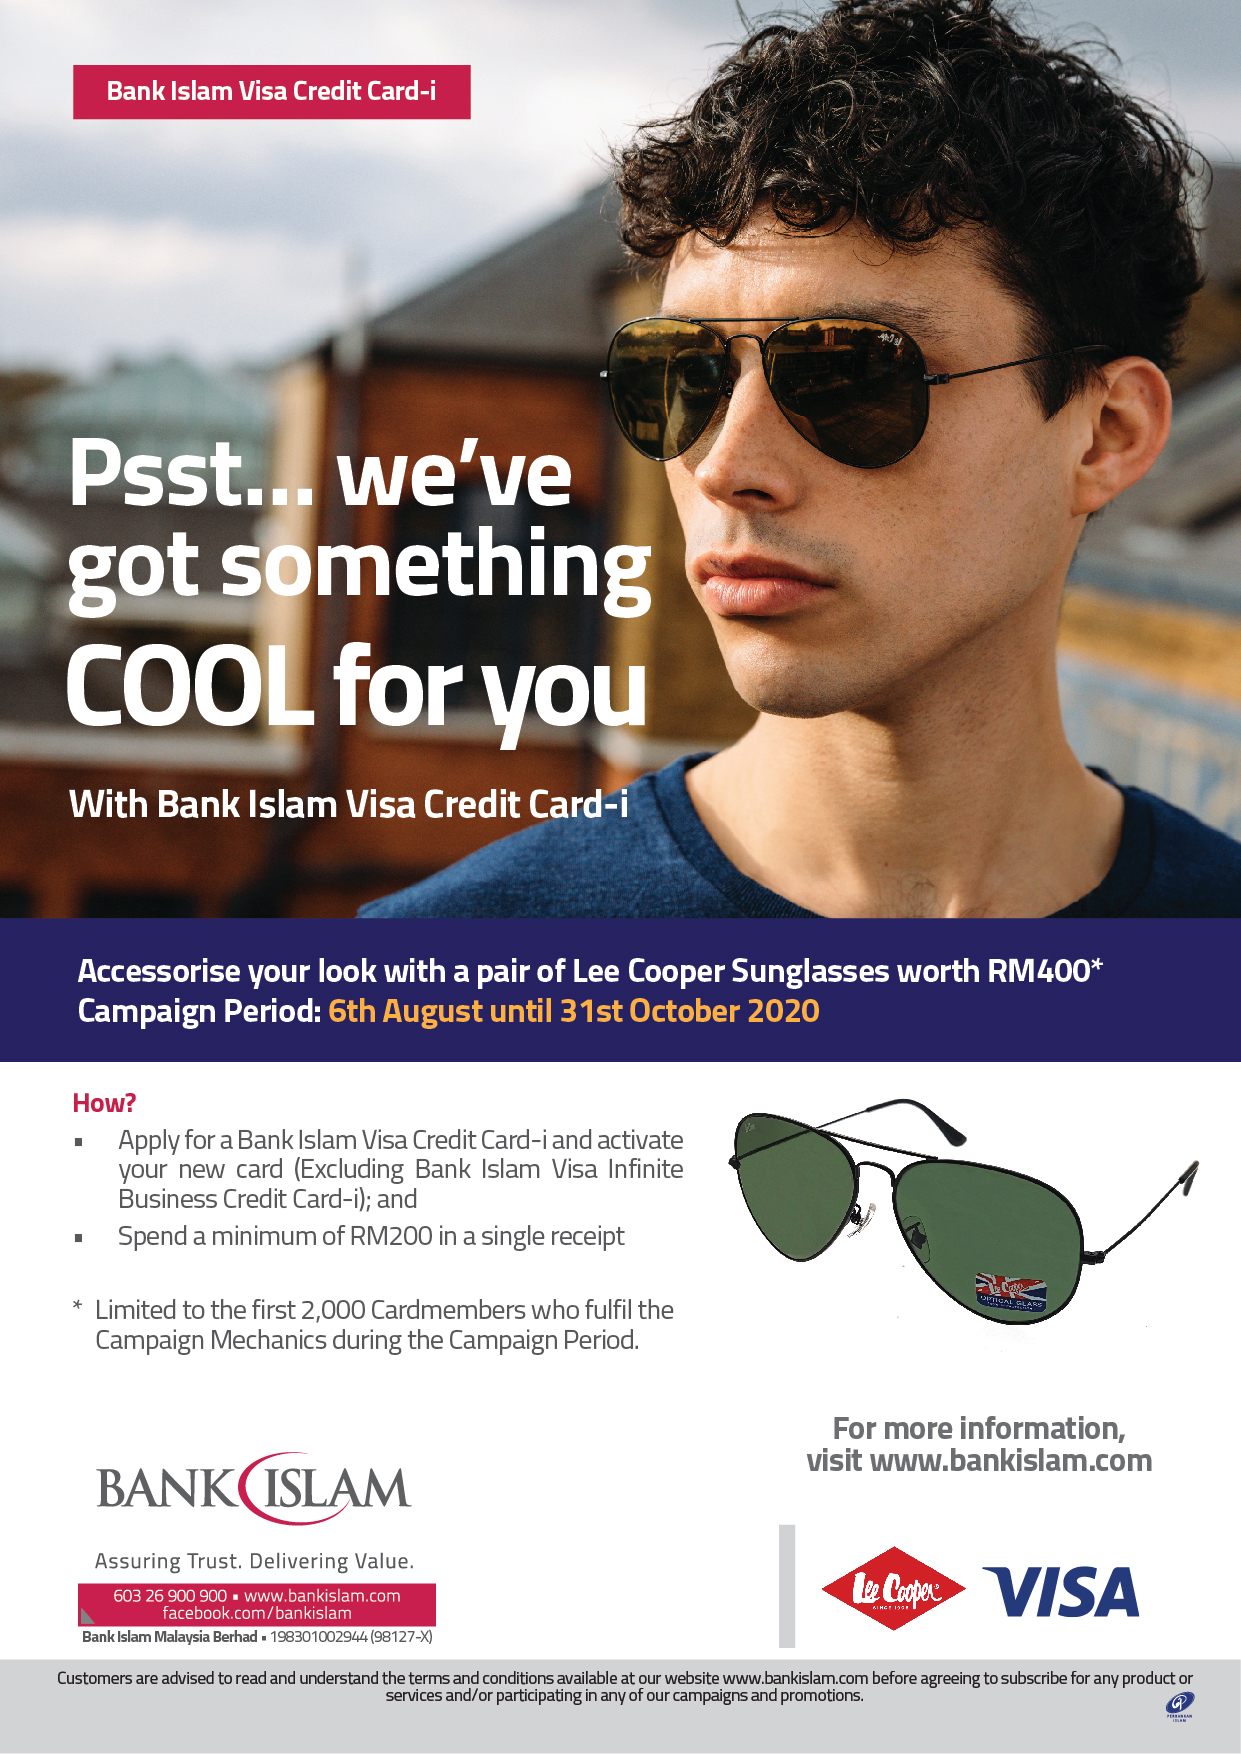 Bank Islam Visa Credit Card-i Campaign "Cool for You ...